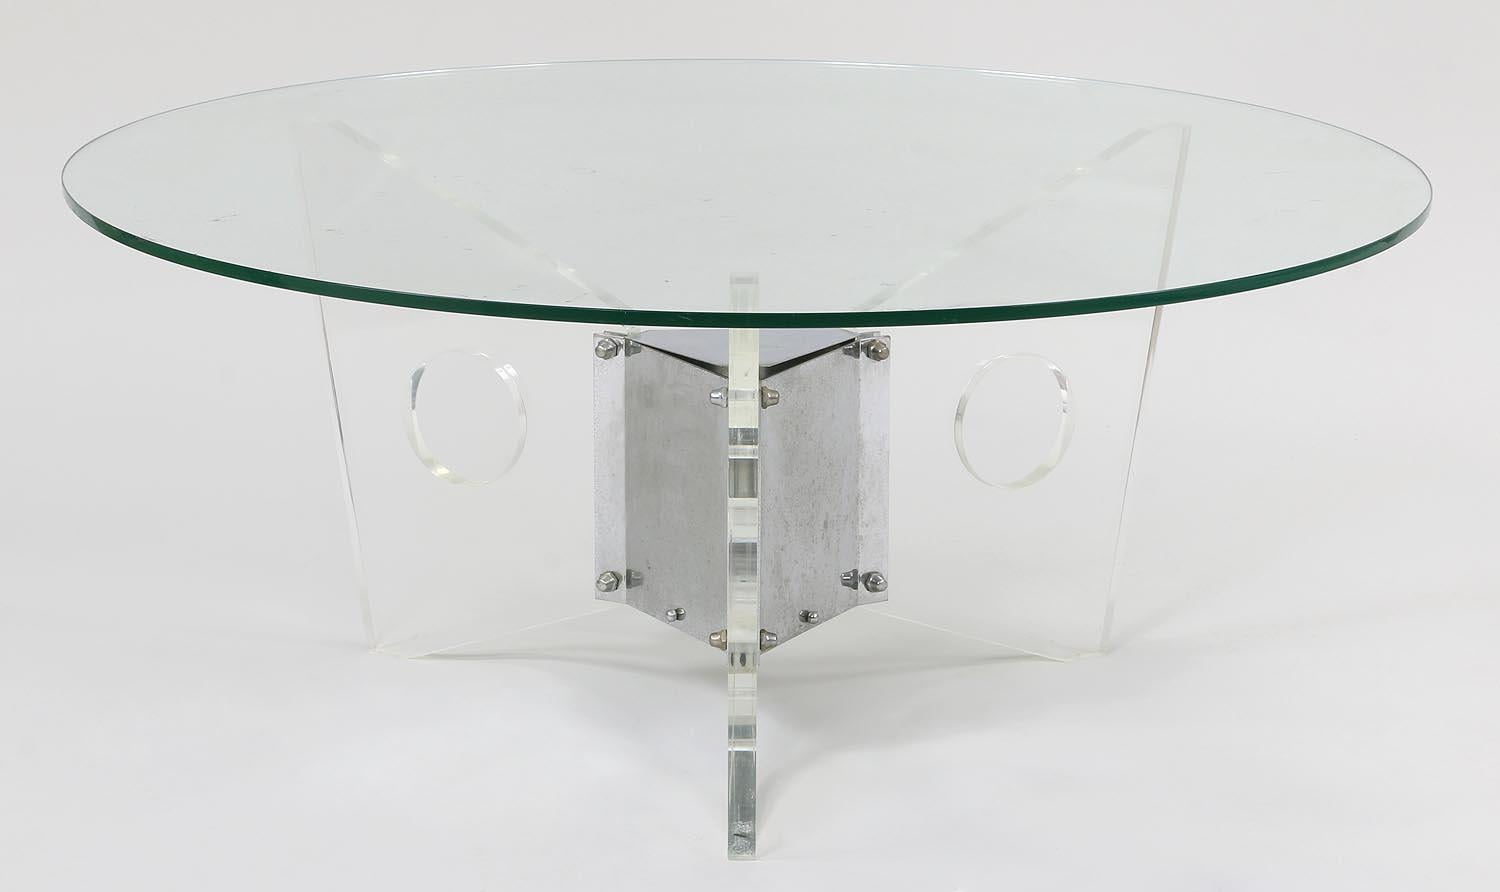 Wonderful Mid-Century Modern round glass top Lucite & chrome base coffee table In The Manner Of Springer

Measurements:
16-1/4'' H x 38'' D
Glass is replaceable if you wish to have a different width.